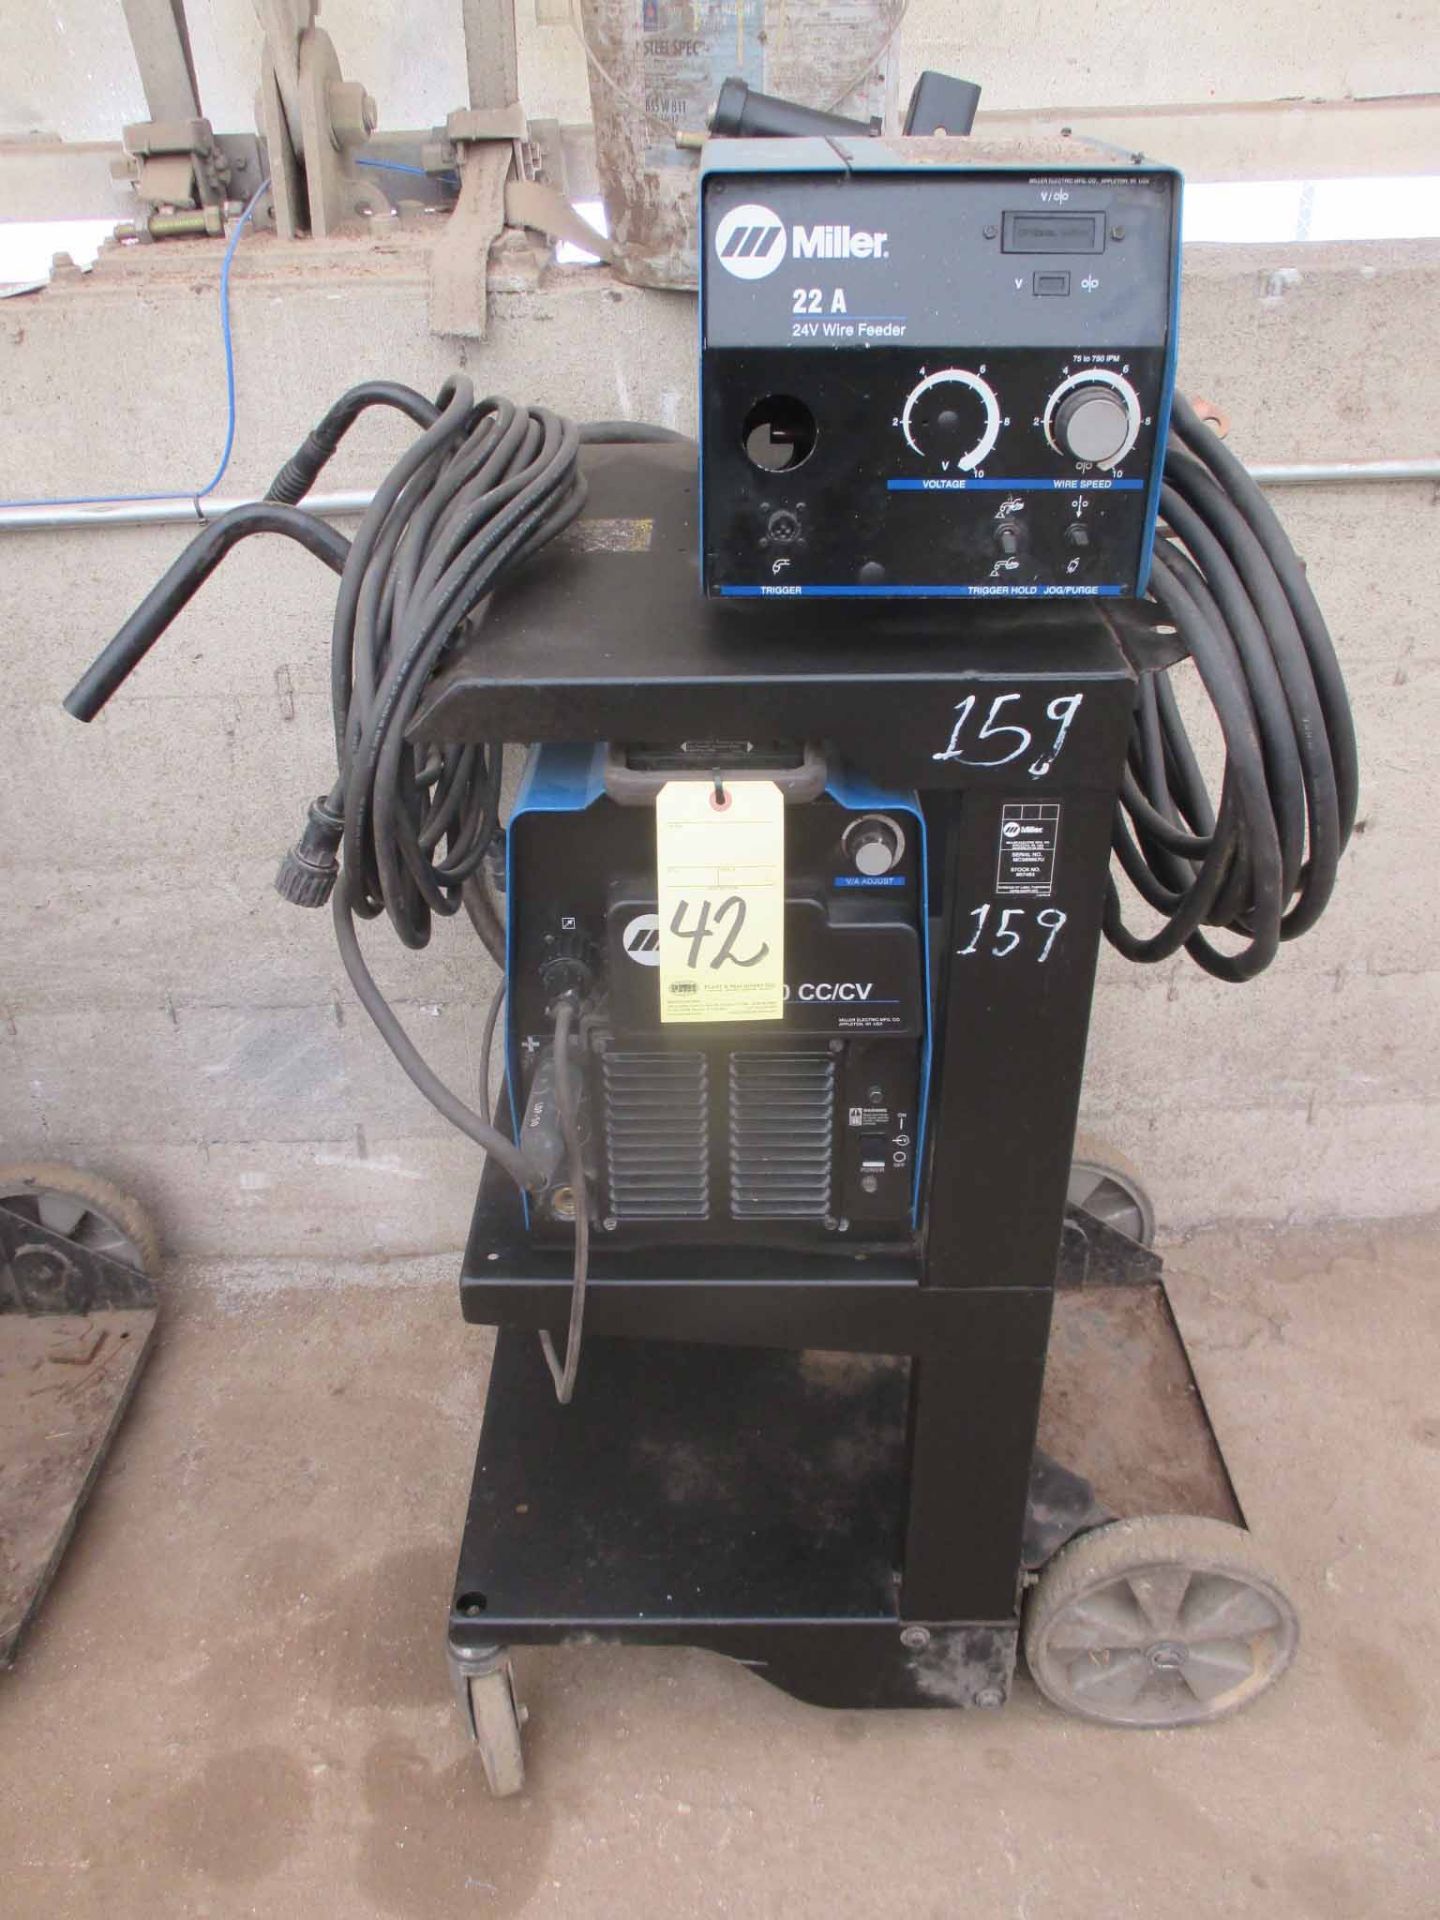 MIG WELDER, MILLER MDL. XMT350, 350 amps @ 34 v., 60% duty cycle, running gear, Miller 22A wire